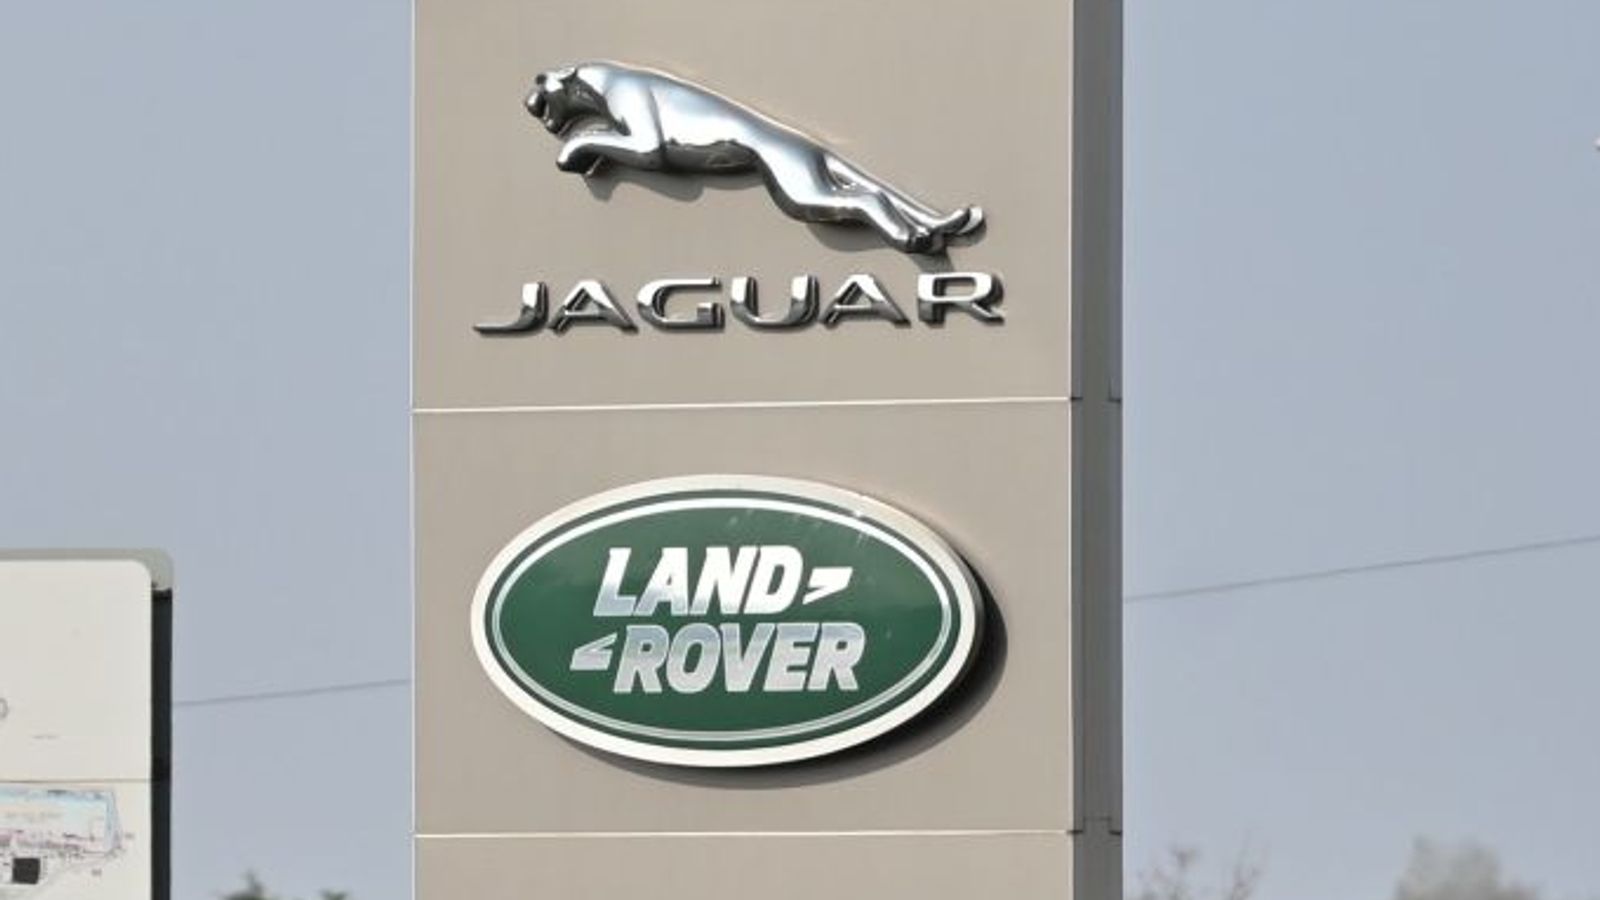 £15bn investment at UK's largest motor manufacturer to enable Jaguar Land Rover to make its first British electric car